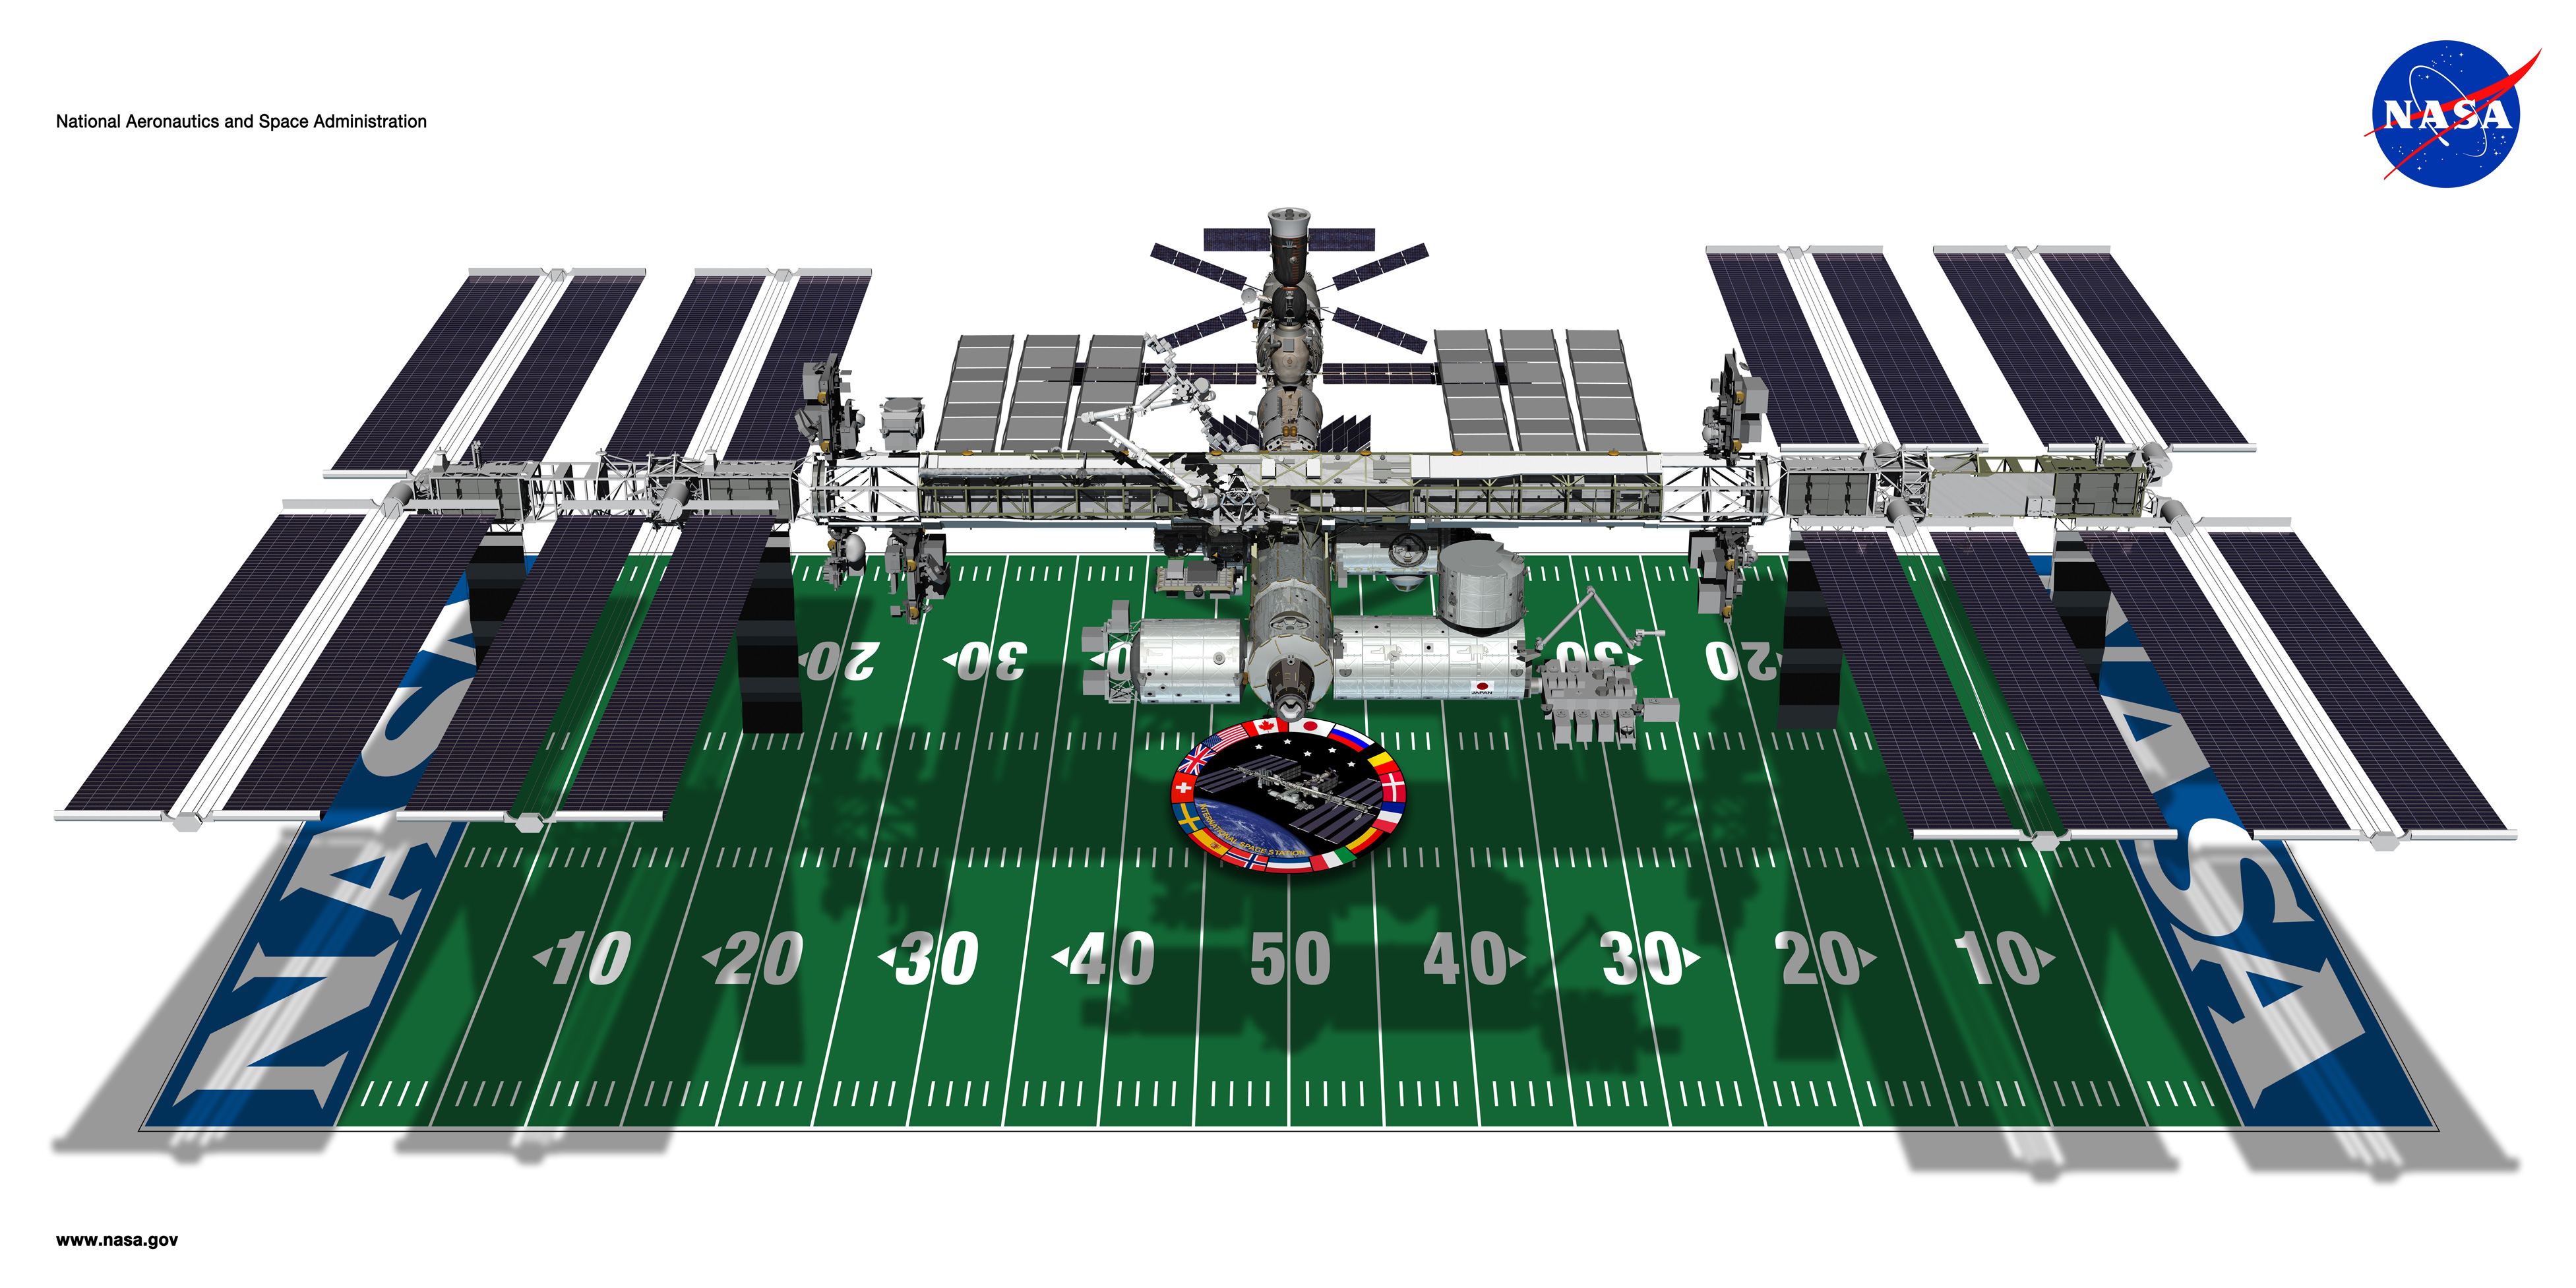 Astronauts will watch Super Bowl from space - Technology & science